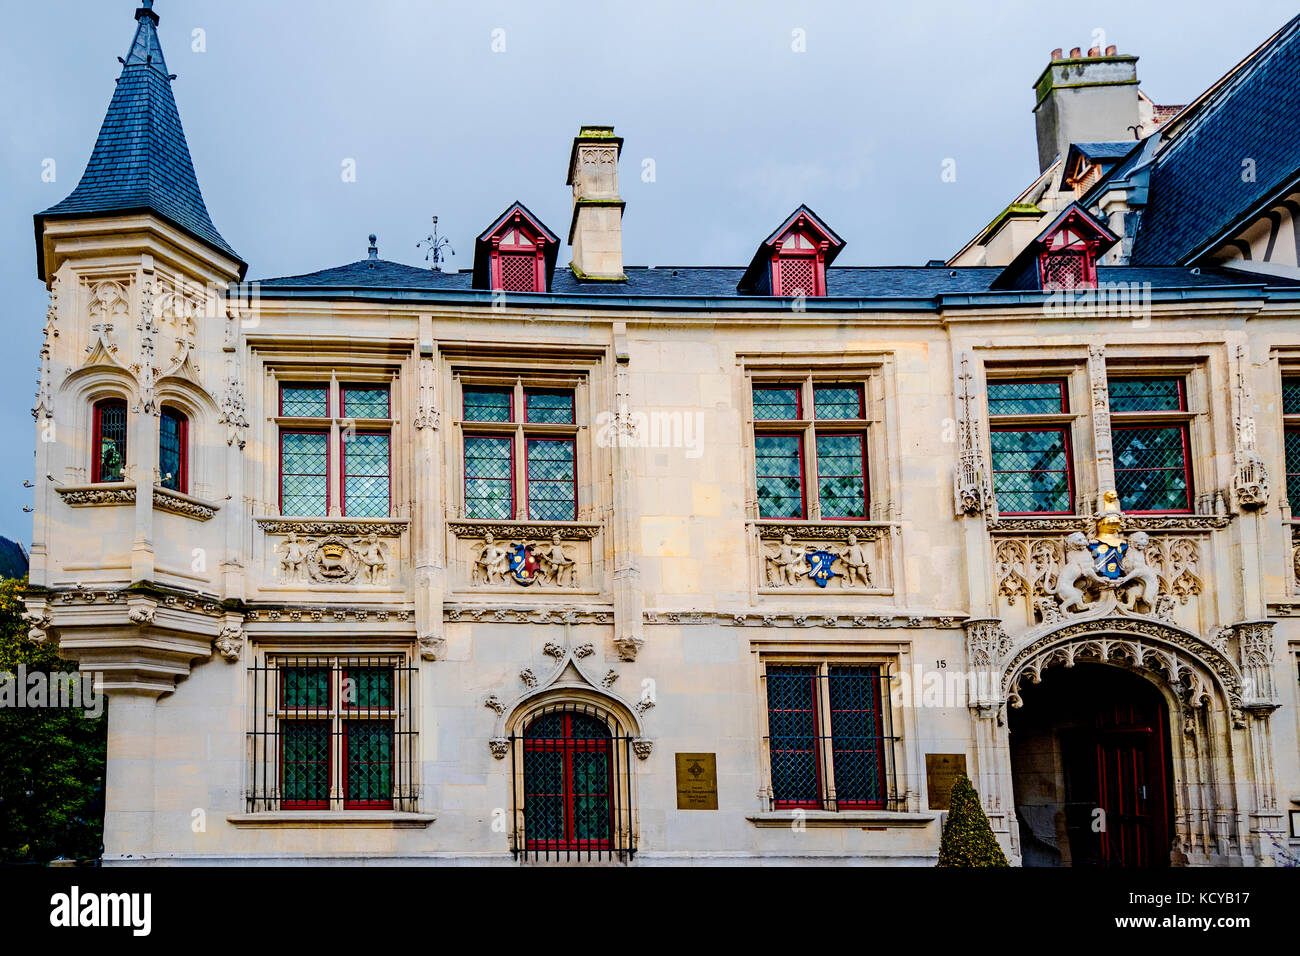 Rouen (France): Hotel de Bourgtheroulde, Normandy, France, Europe Stock Photo